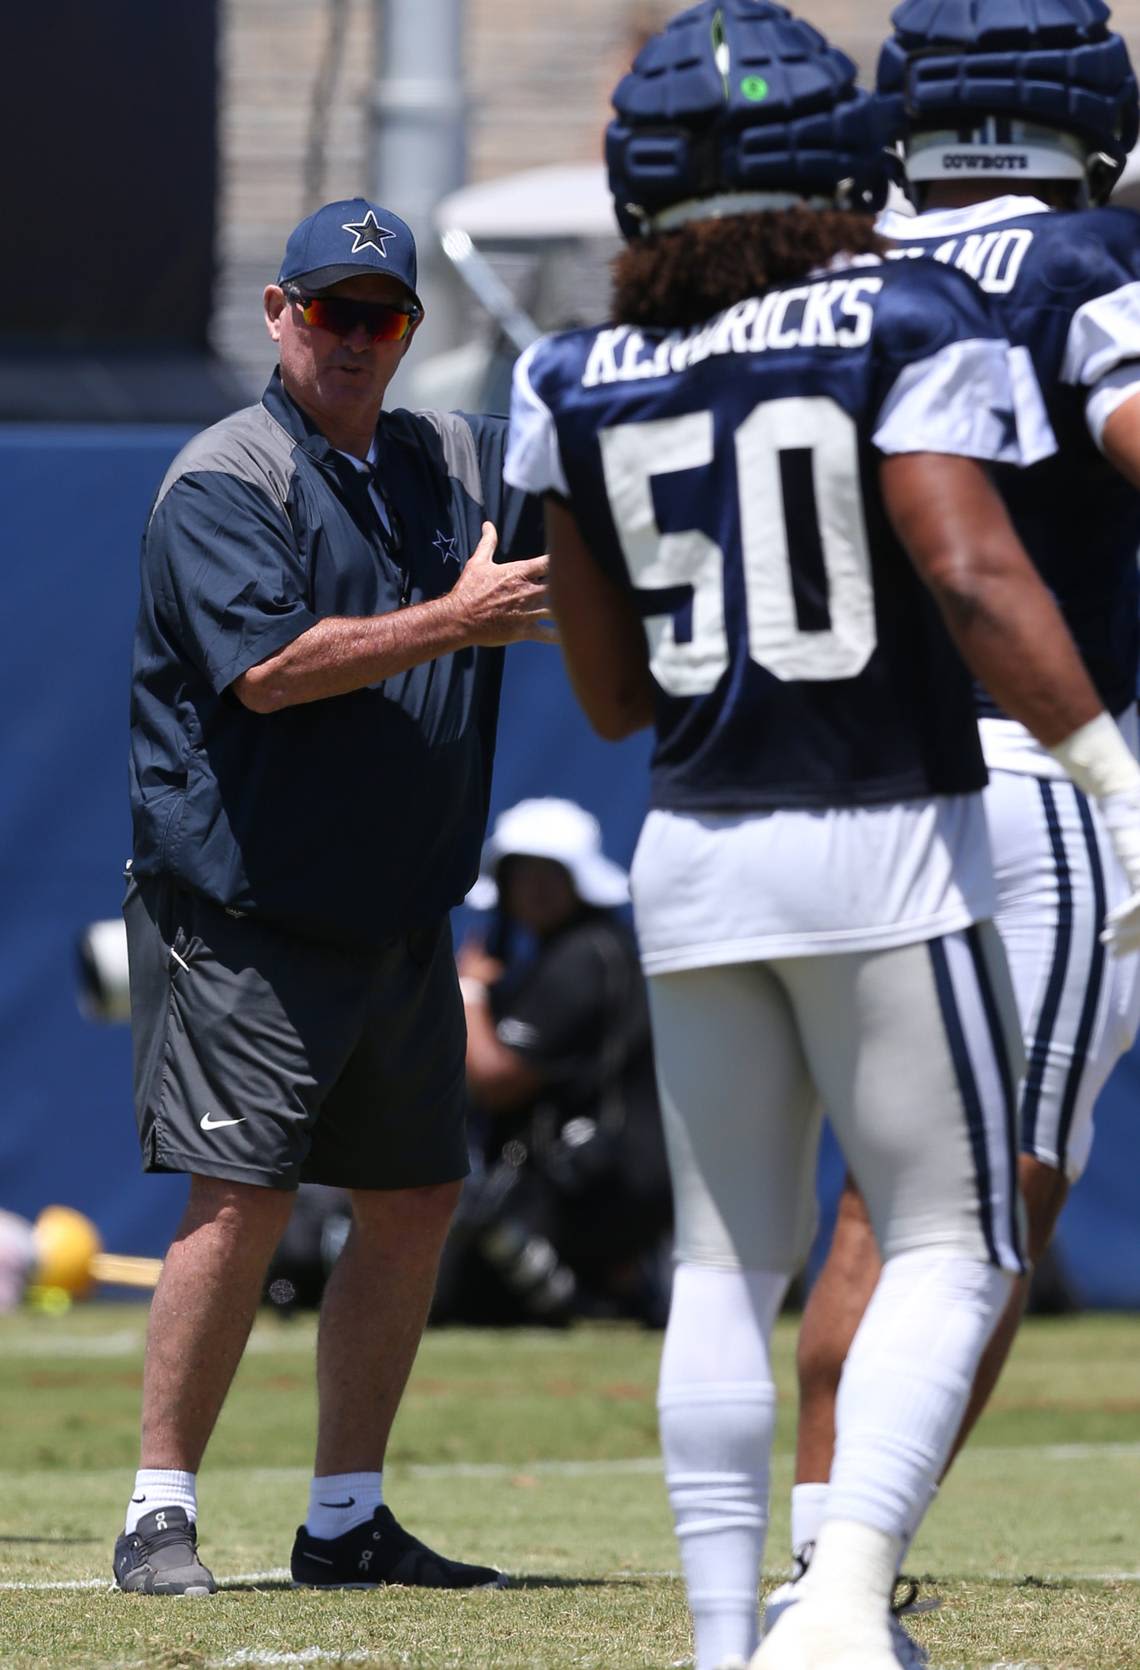 New, old Cowboys defensive coordinator Mike Zimmer talks softer but the edge remains